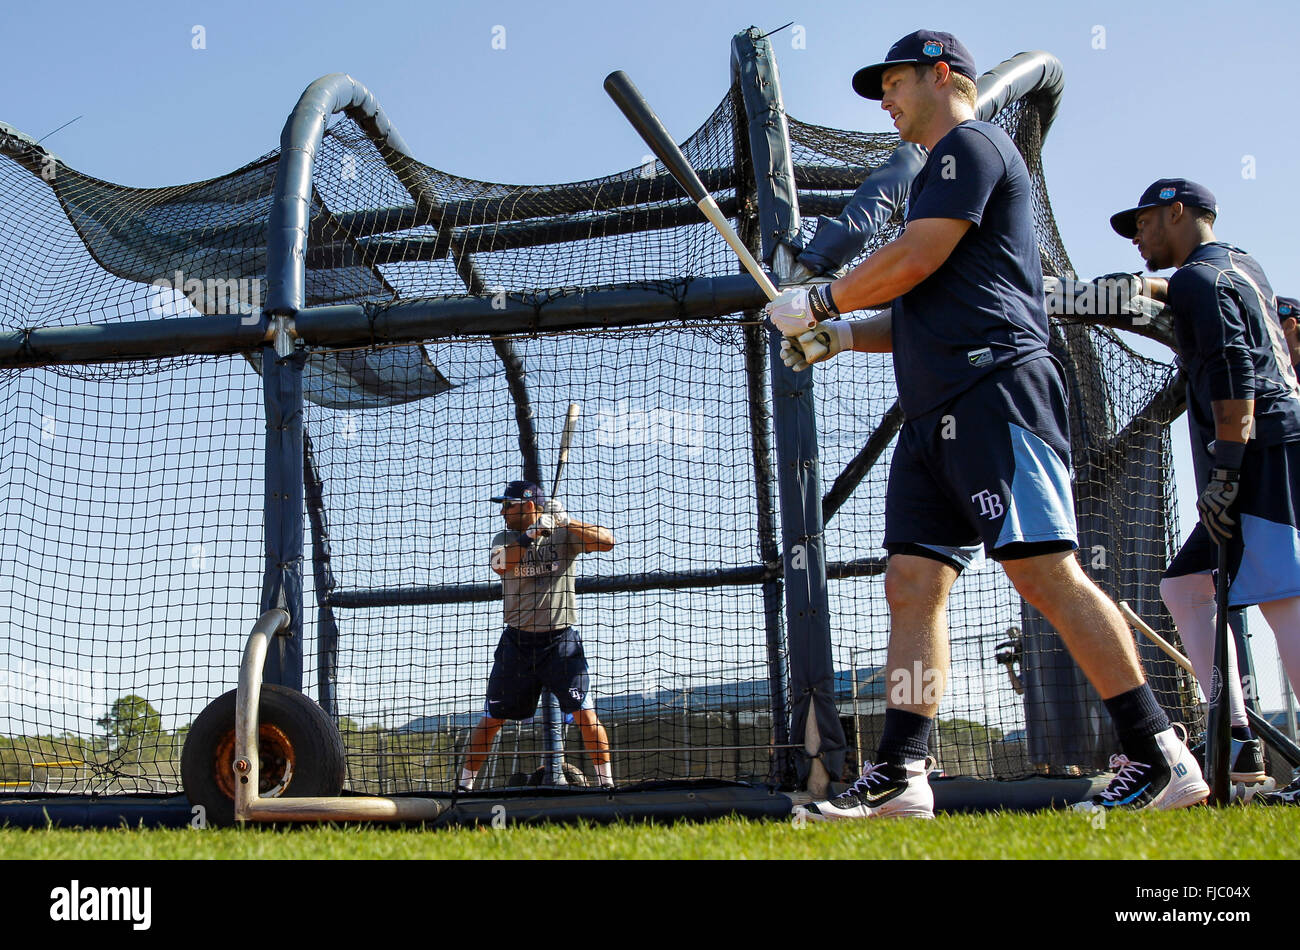 Port Charlotte, Florida, USA. 1st Mar, 2016. WILL VRAGOVIC | Times.Tampa Bay Rays left fielder Corey Dickerson (10) warms up while center fielder Kevin Kiermaier (39) takes cut in the batting cage during Rays Spring Training at Charlotte Sports Park in Port Charlotte, Fla. on Tuesday, March 1, 2016. © Will Vragovic/Tampa Bay Times/ZUMA Wire/Alamy Live News Stock Photo